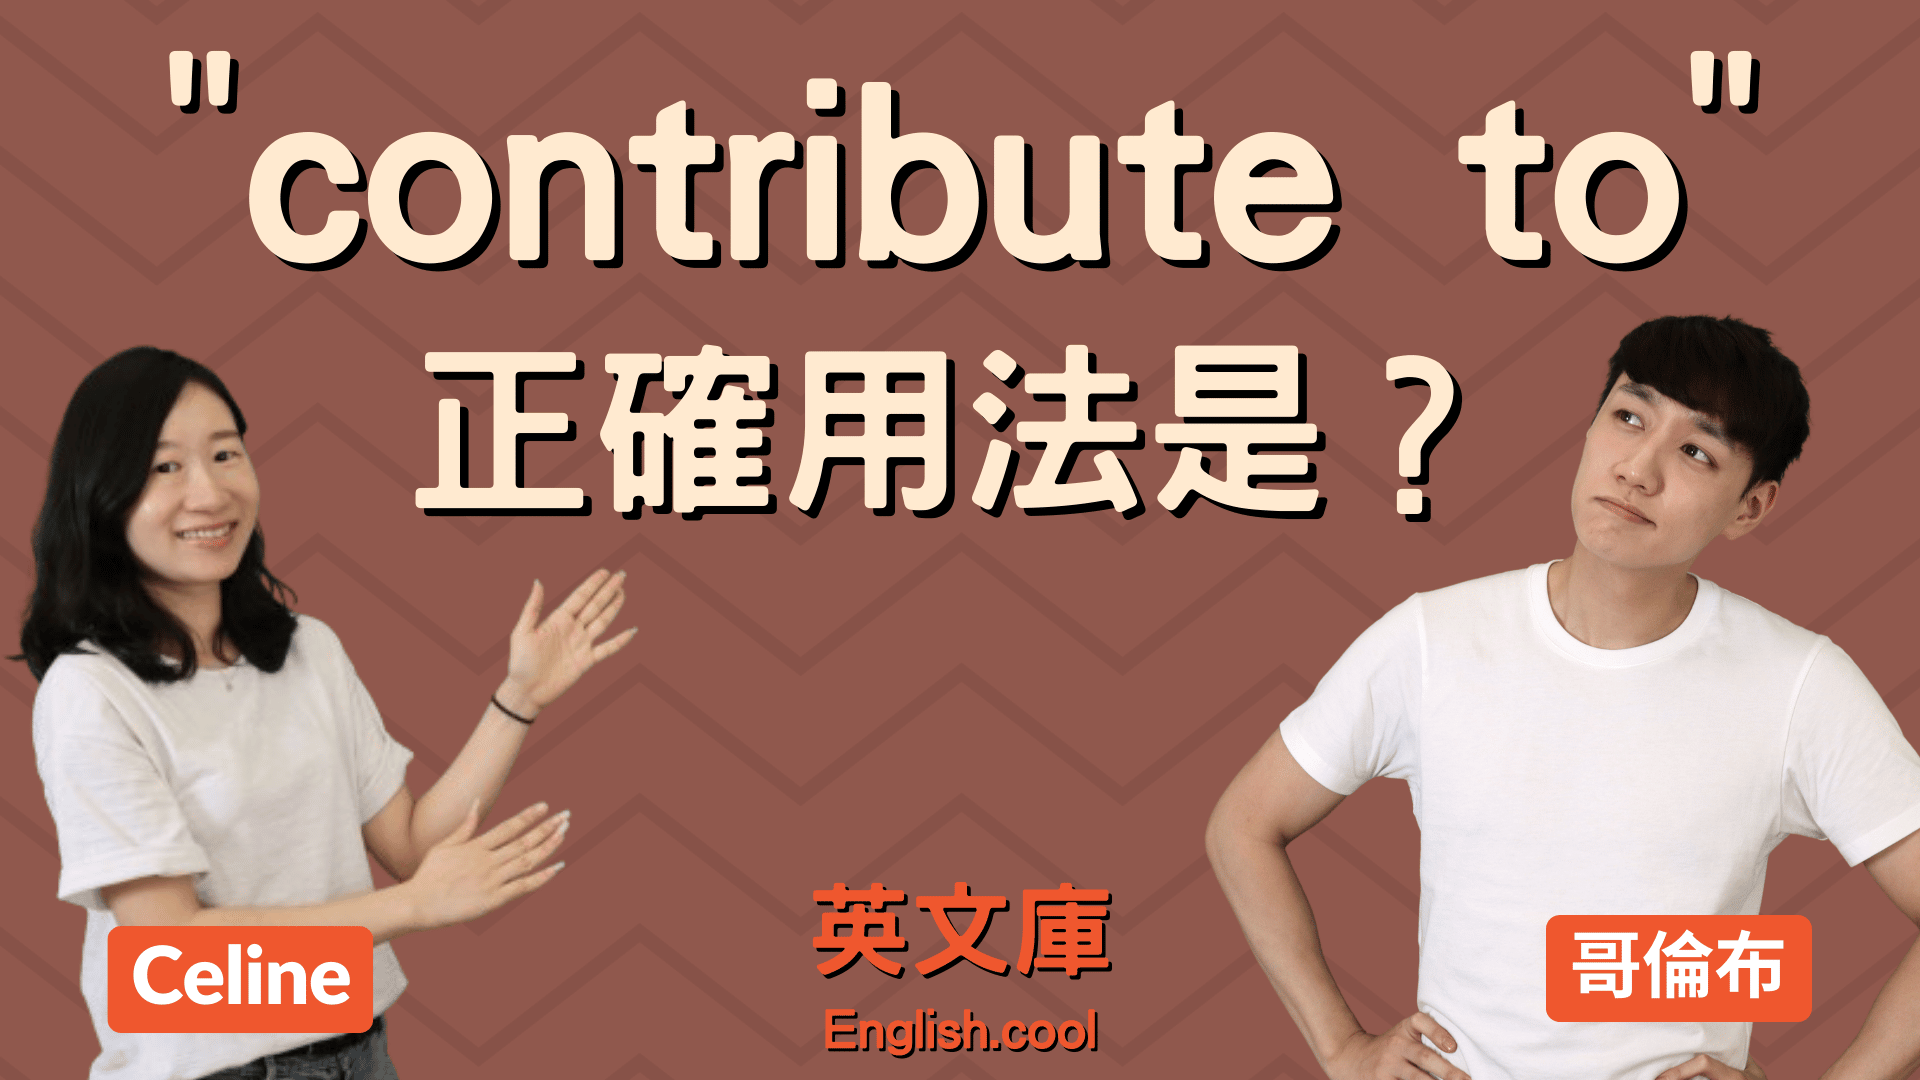 You are currently viewing 「contribute to」的意思和用法是？來看例句搞懂！